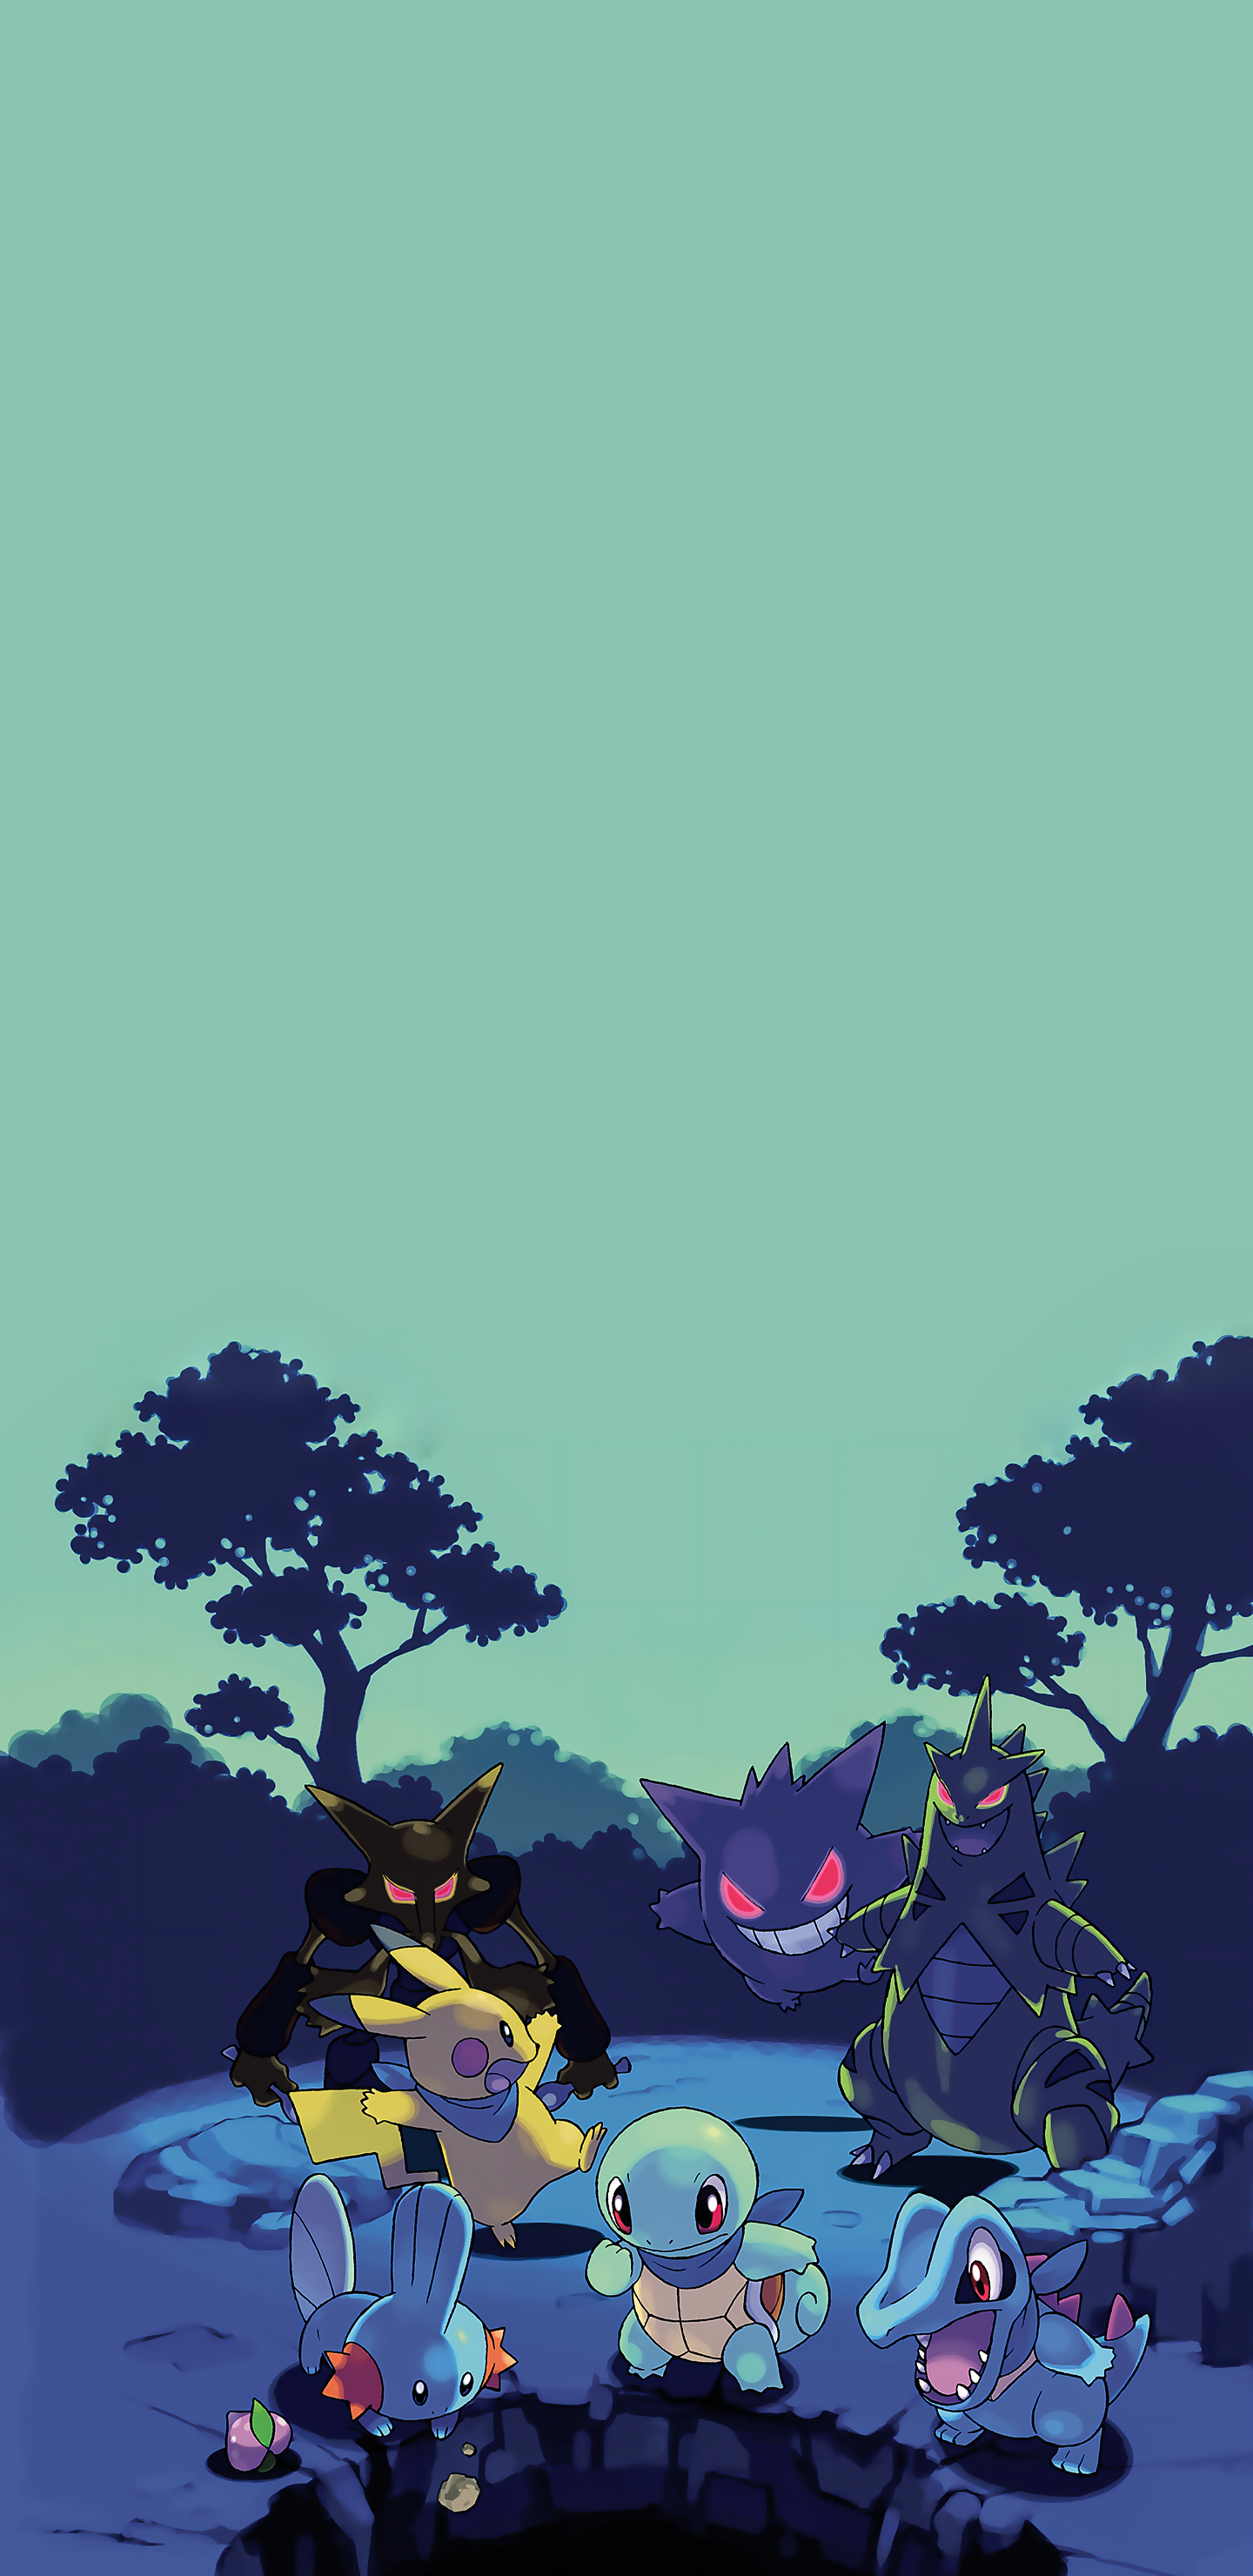 Pokémon For Phone Wallpapers - Wallpaper Cave